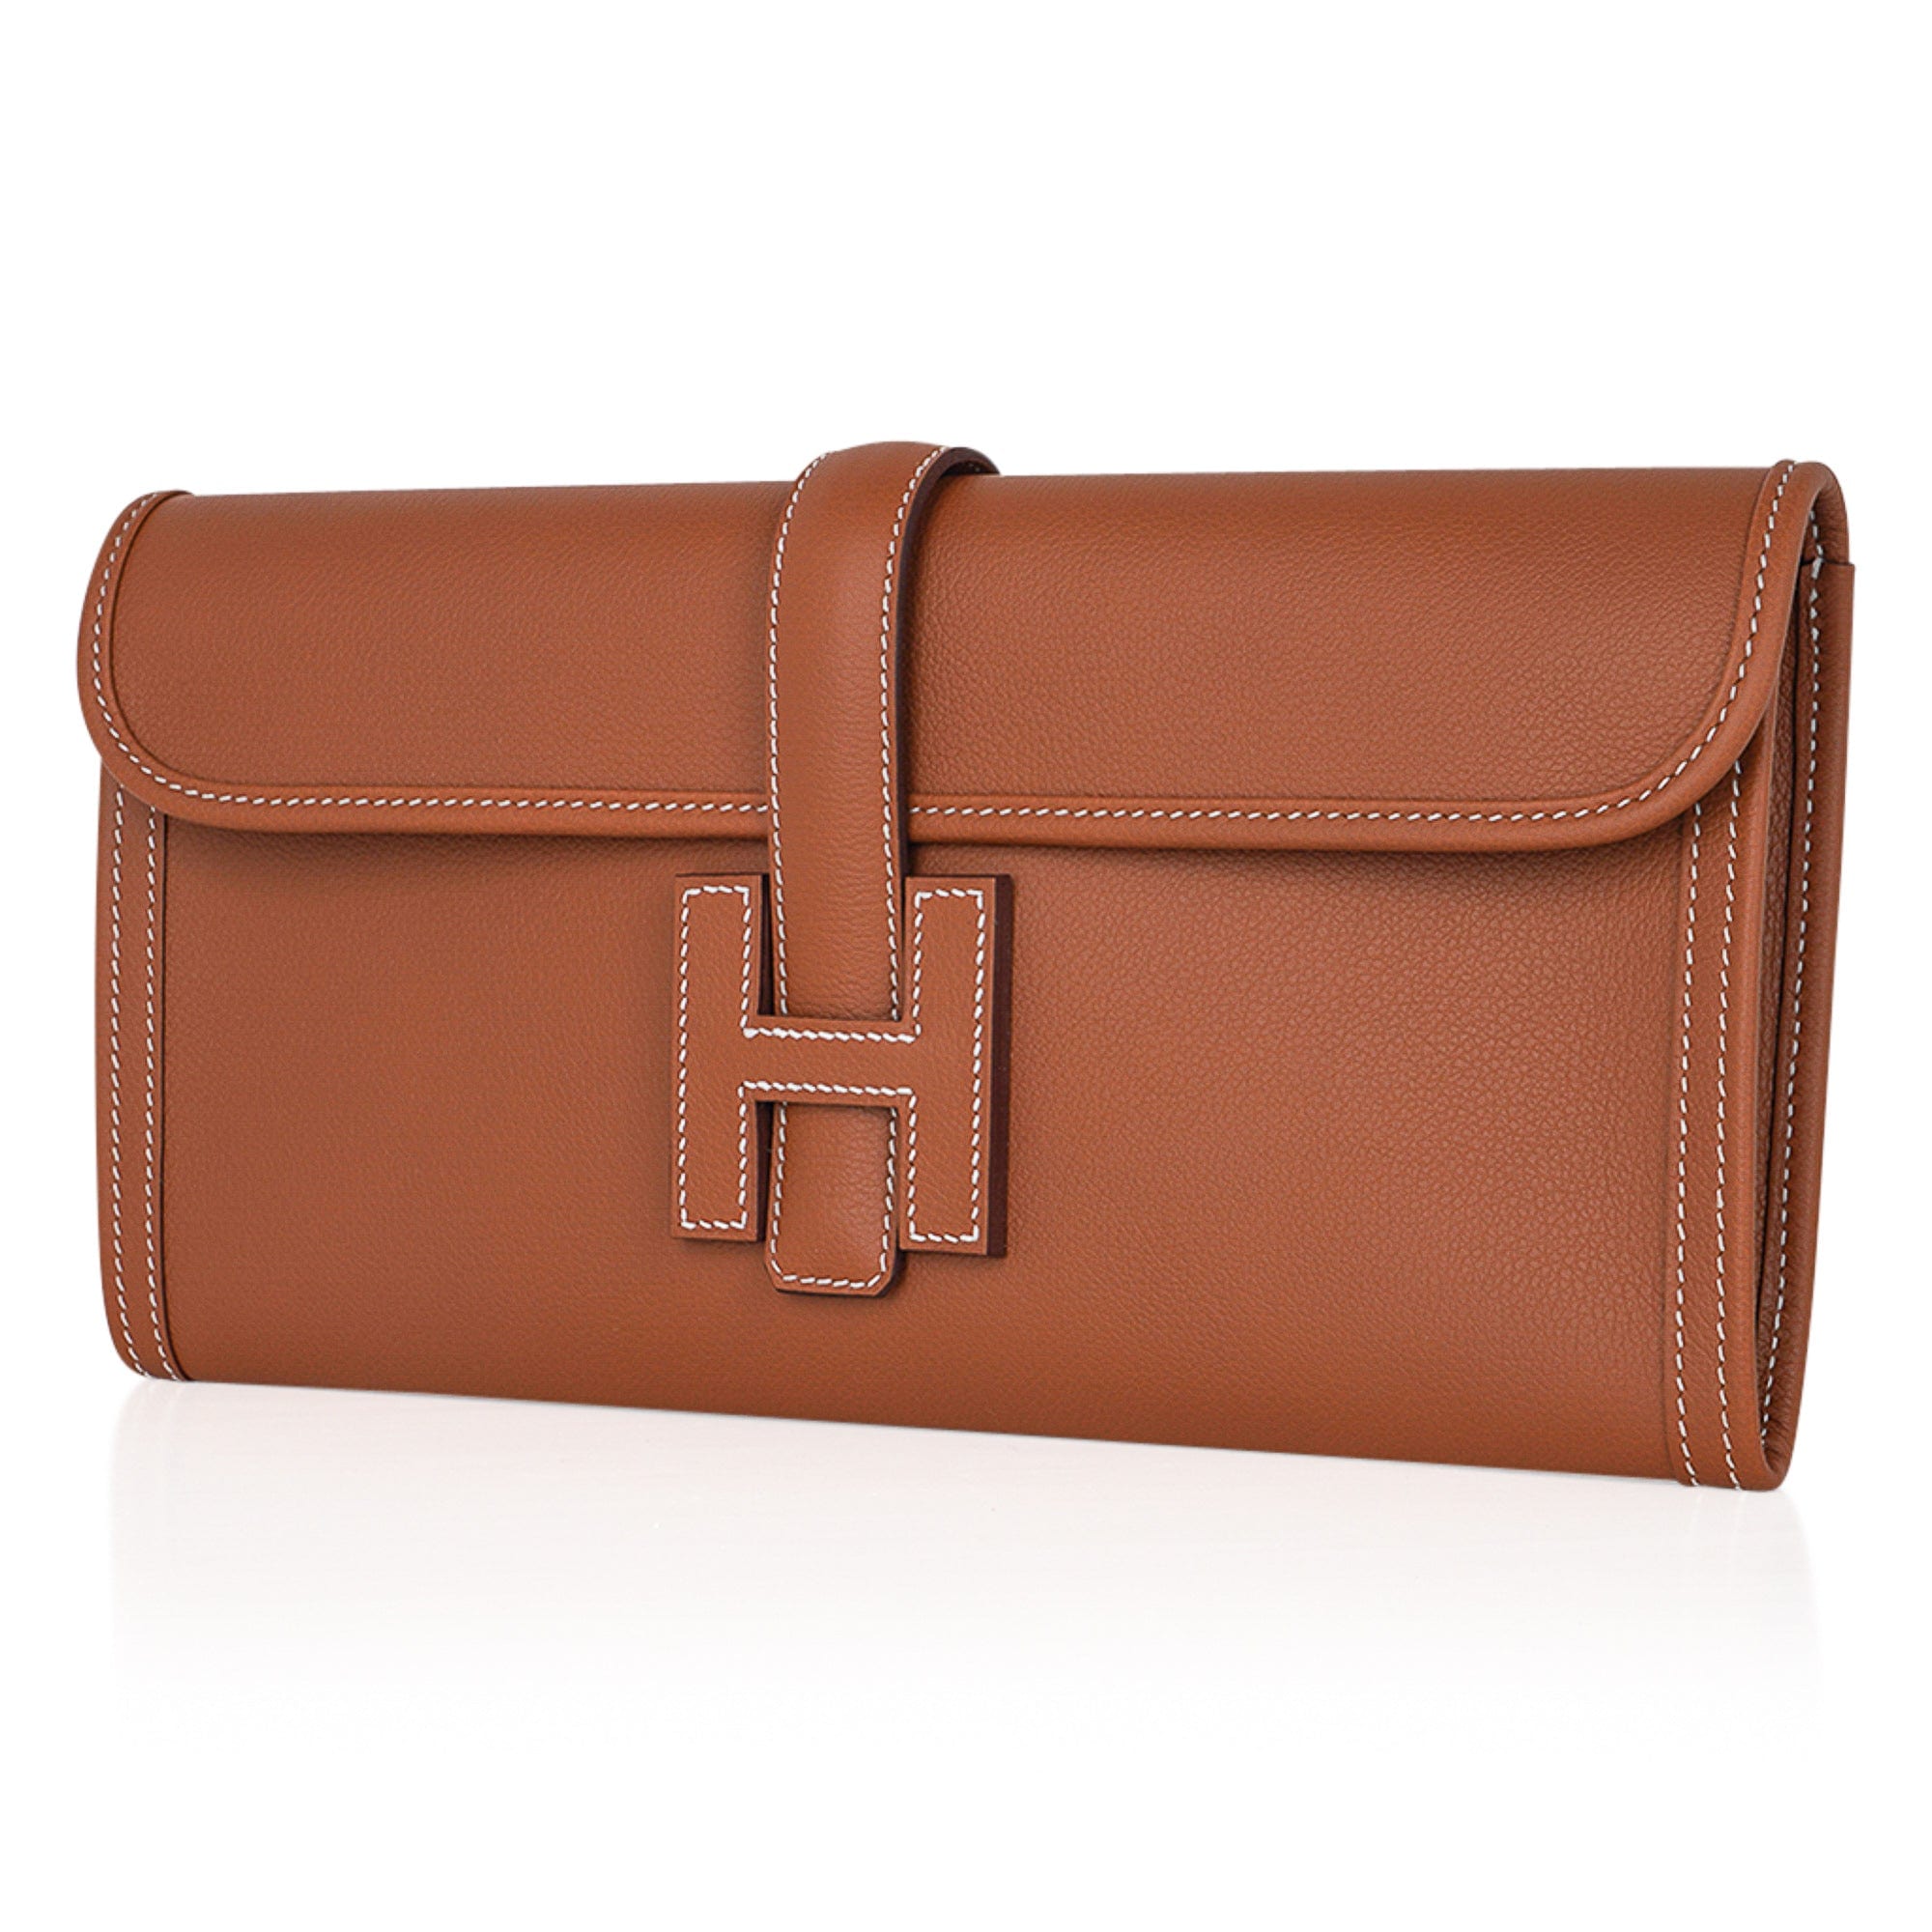 Hermes Jige Elan 29 Gold Clutch Bag Evercolor Leather • MIGHTYCHIC • 